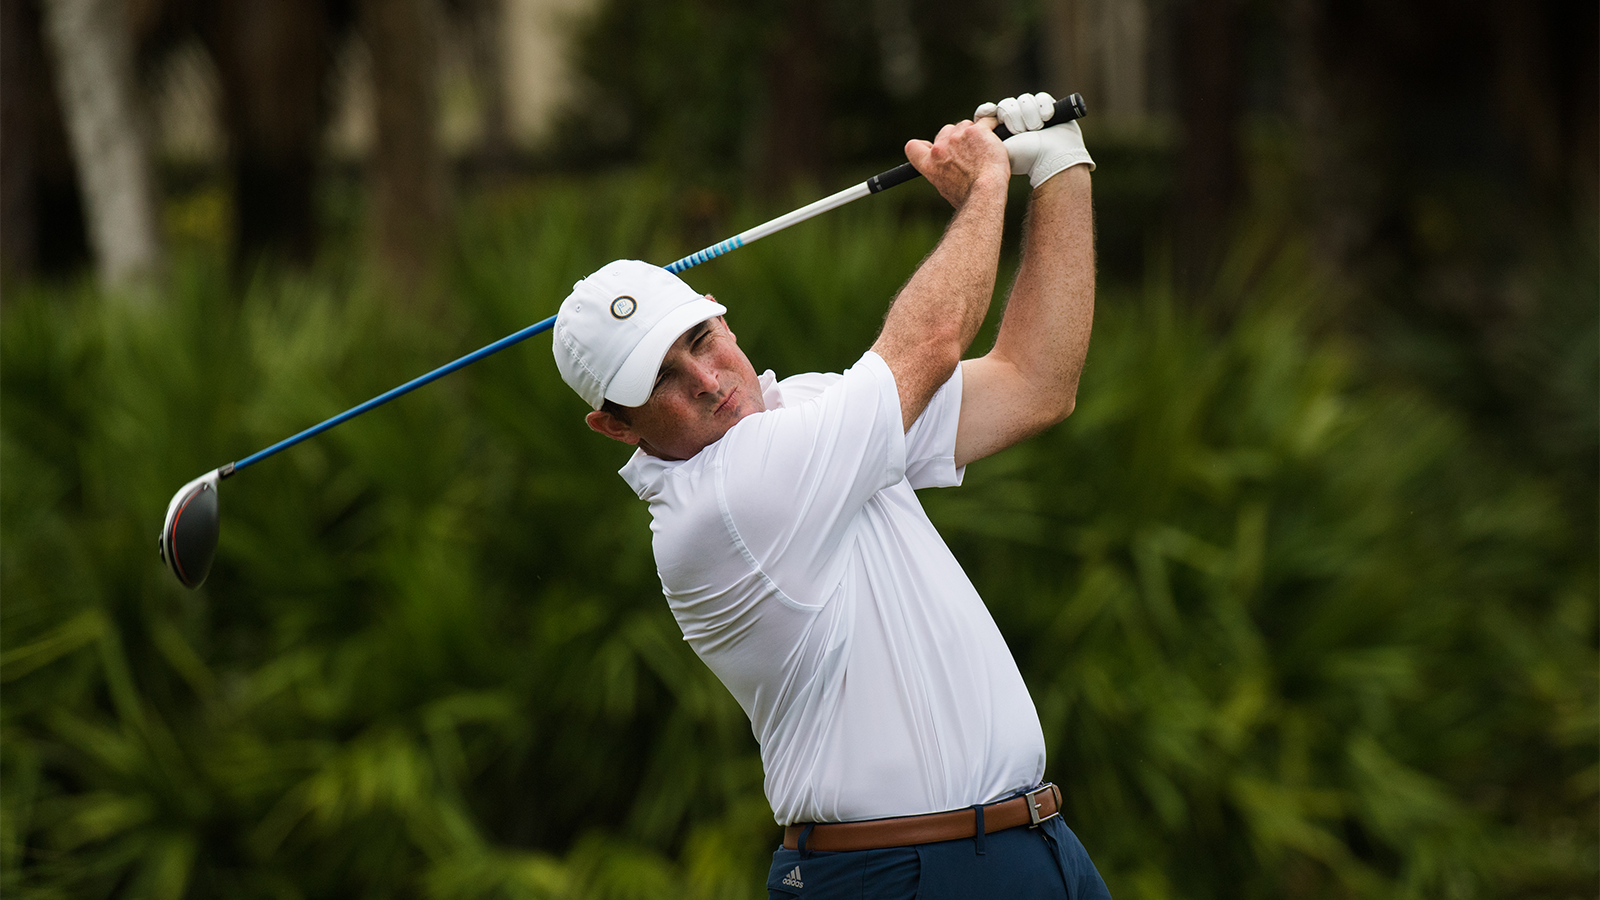 Steve Delmar hits his tee shot on the ninth hole during the second round for the 43rd National Car Rental Assistant PGA Professional Championship held at the PGA Golf Club on November 15, 2019 in Port St. Lucie, Florida. (Photo by Hailey Garrett/PGA of America)